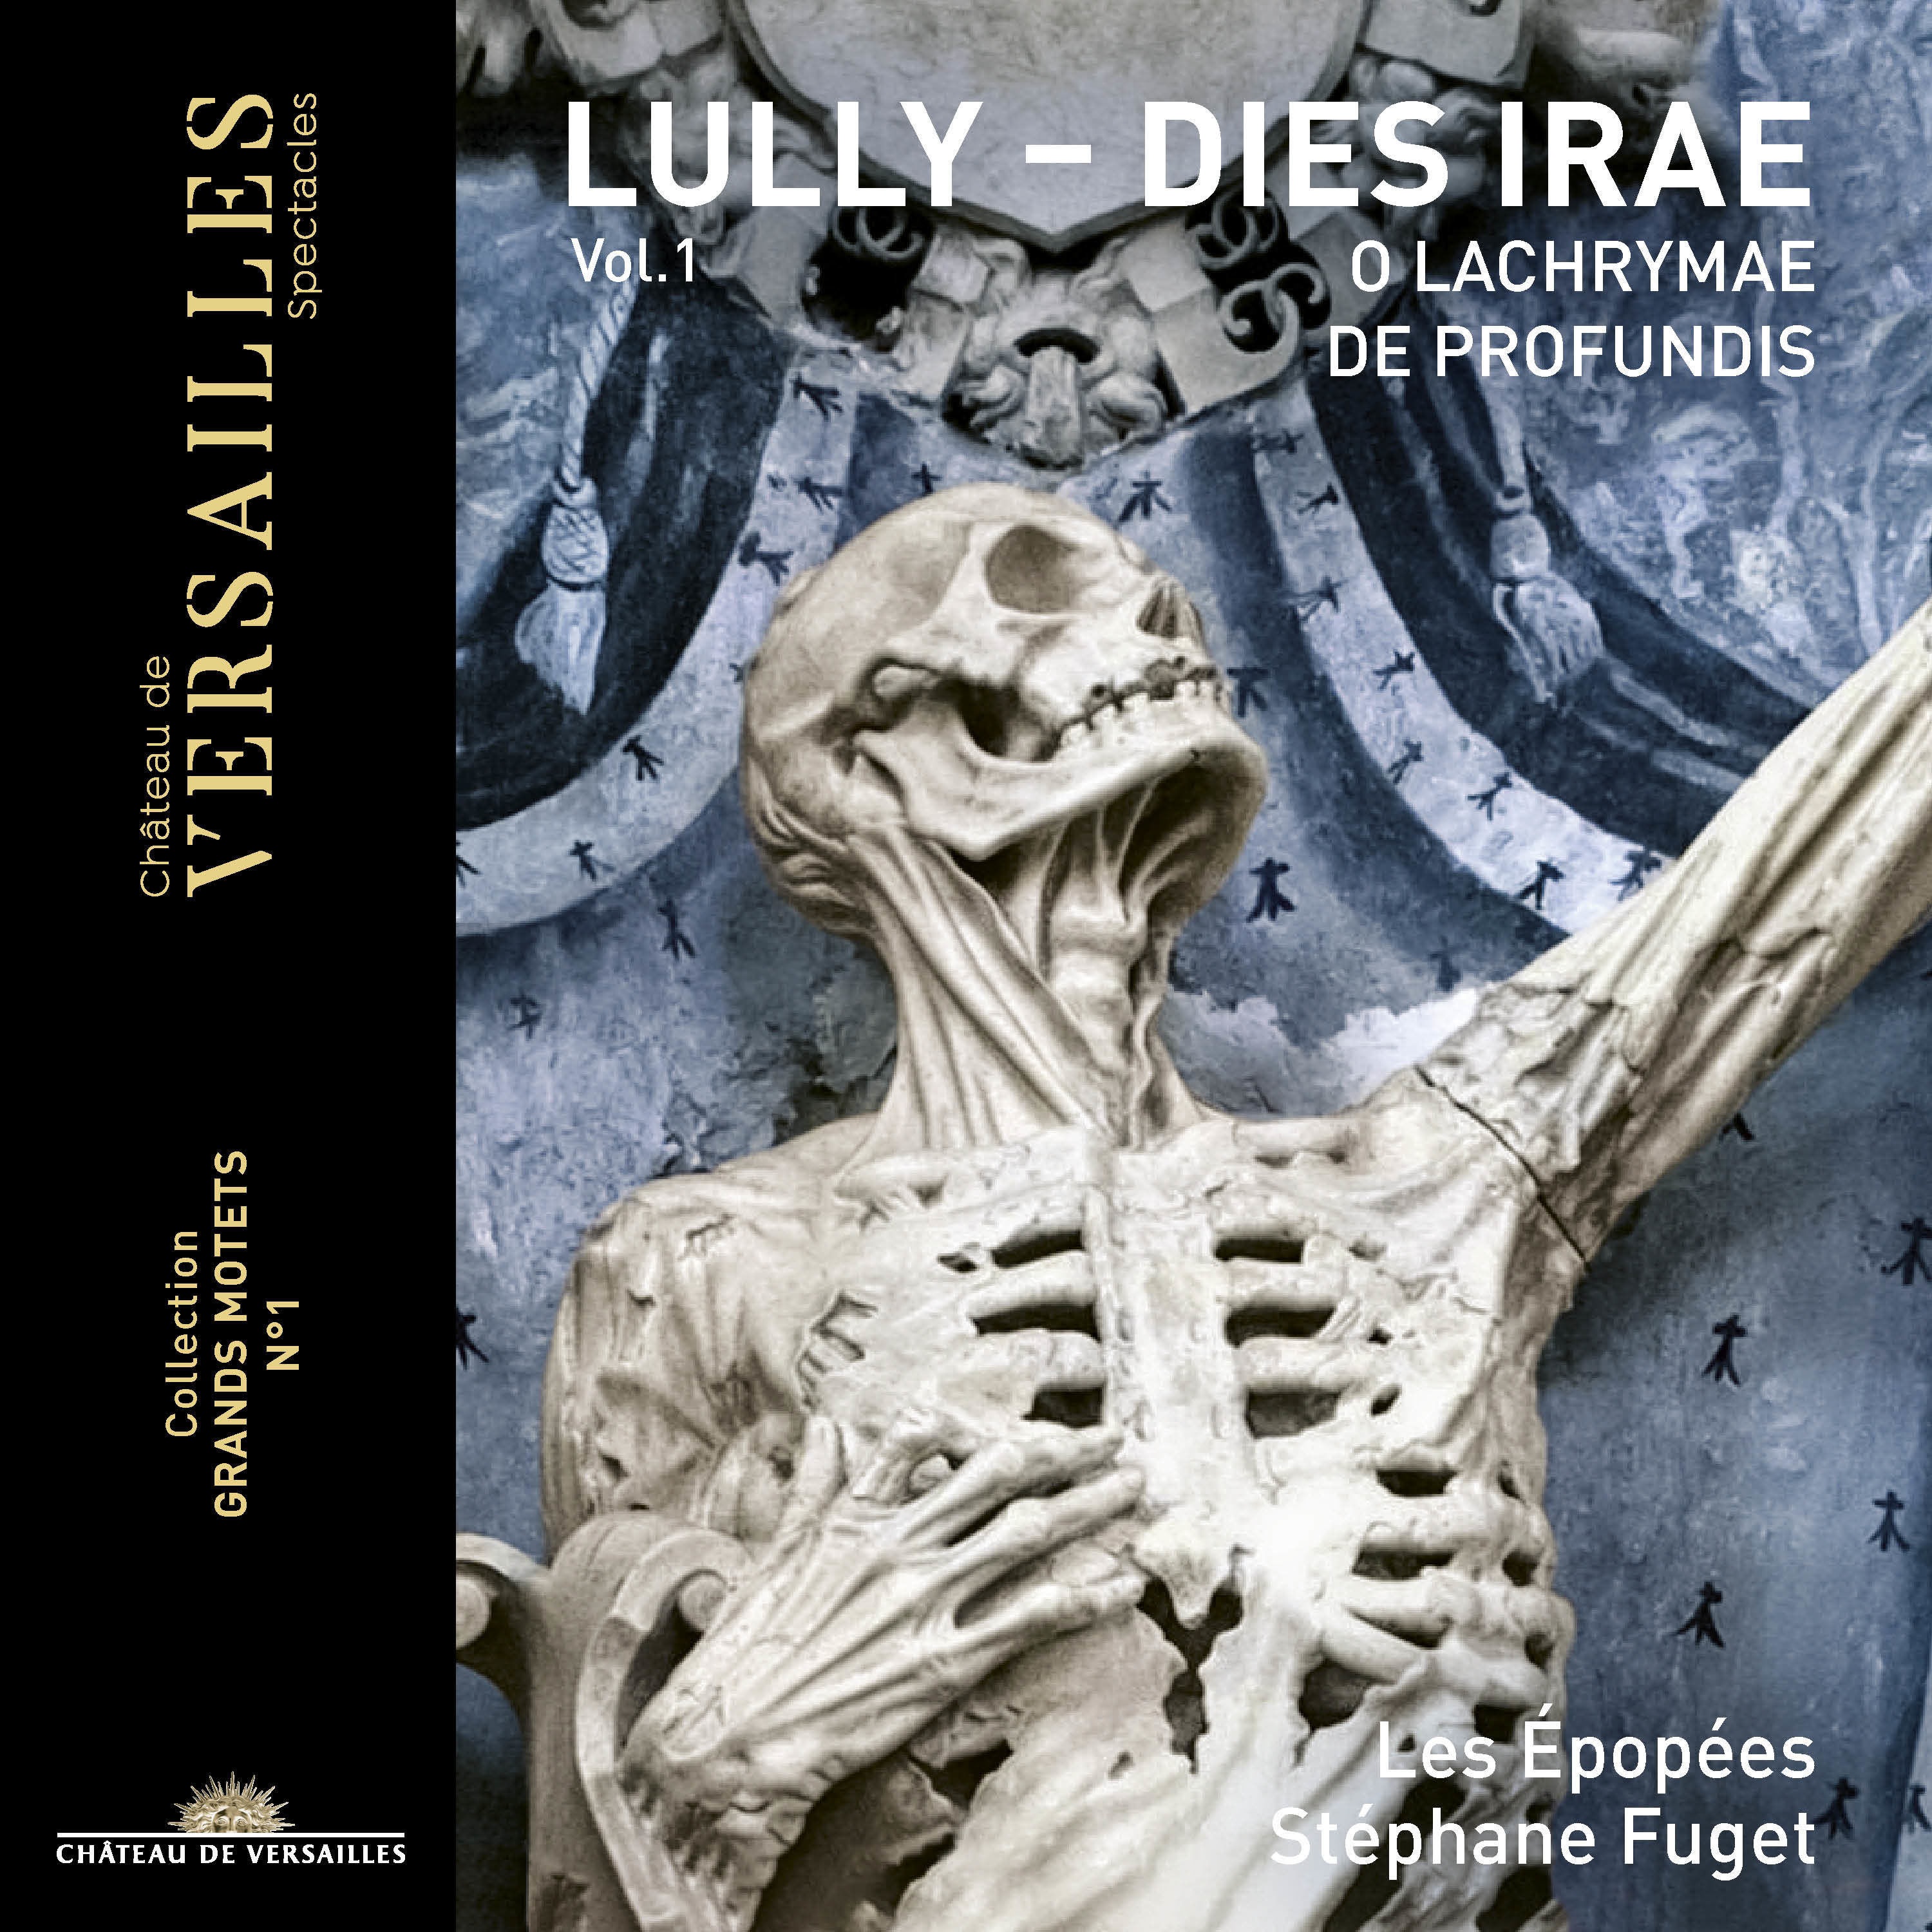 Les Epopees & Stephane Fuget - Lully: Dies Irae (Collection Grands motets, Vol. 1) (2021) [FLAC 24bit/88,2kHz]